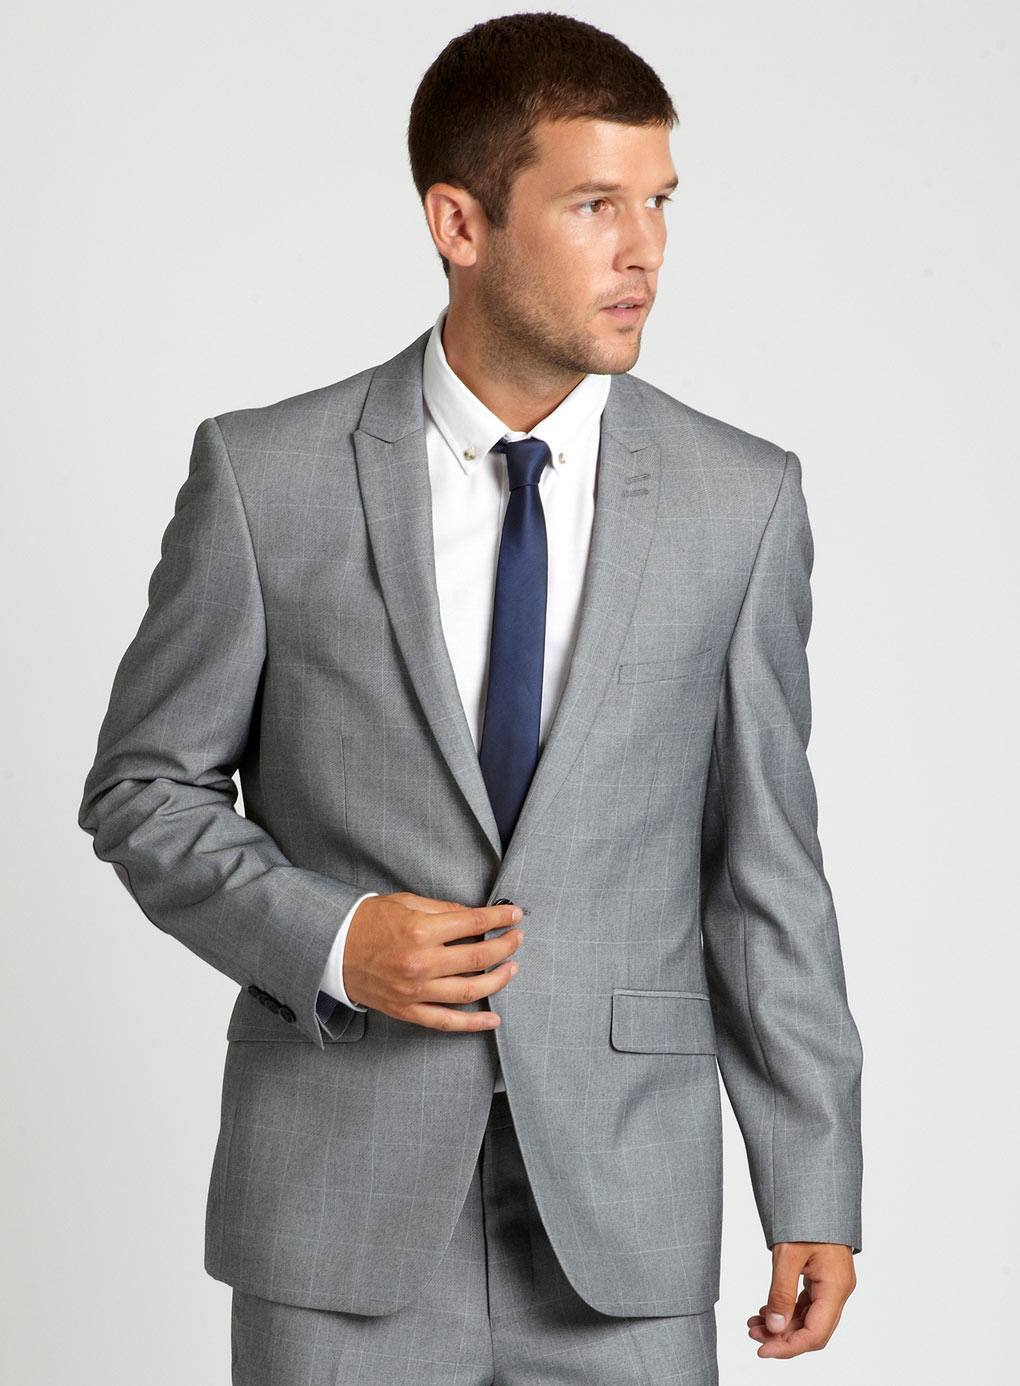 What colour shirt can be worn with a grey suit? | yahoo 